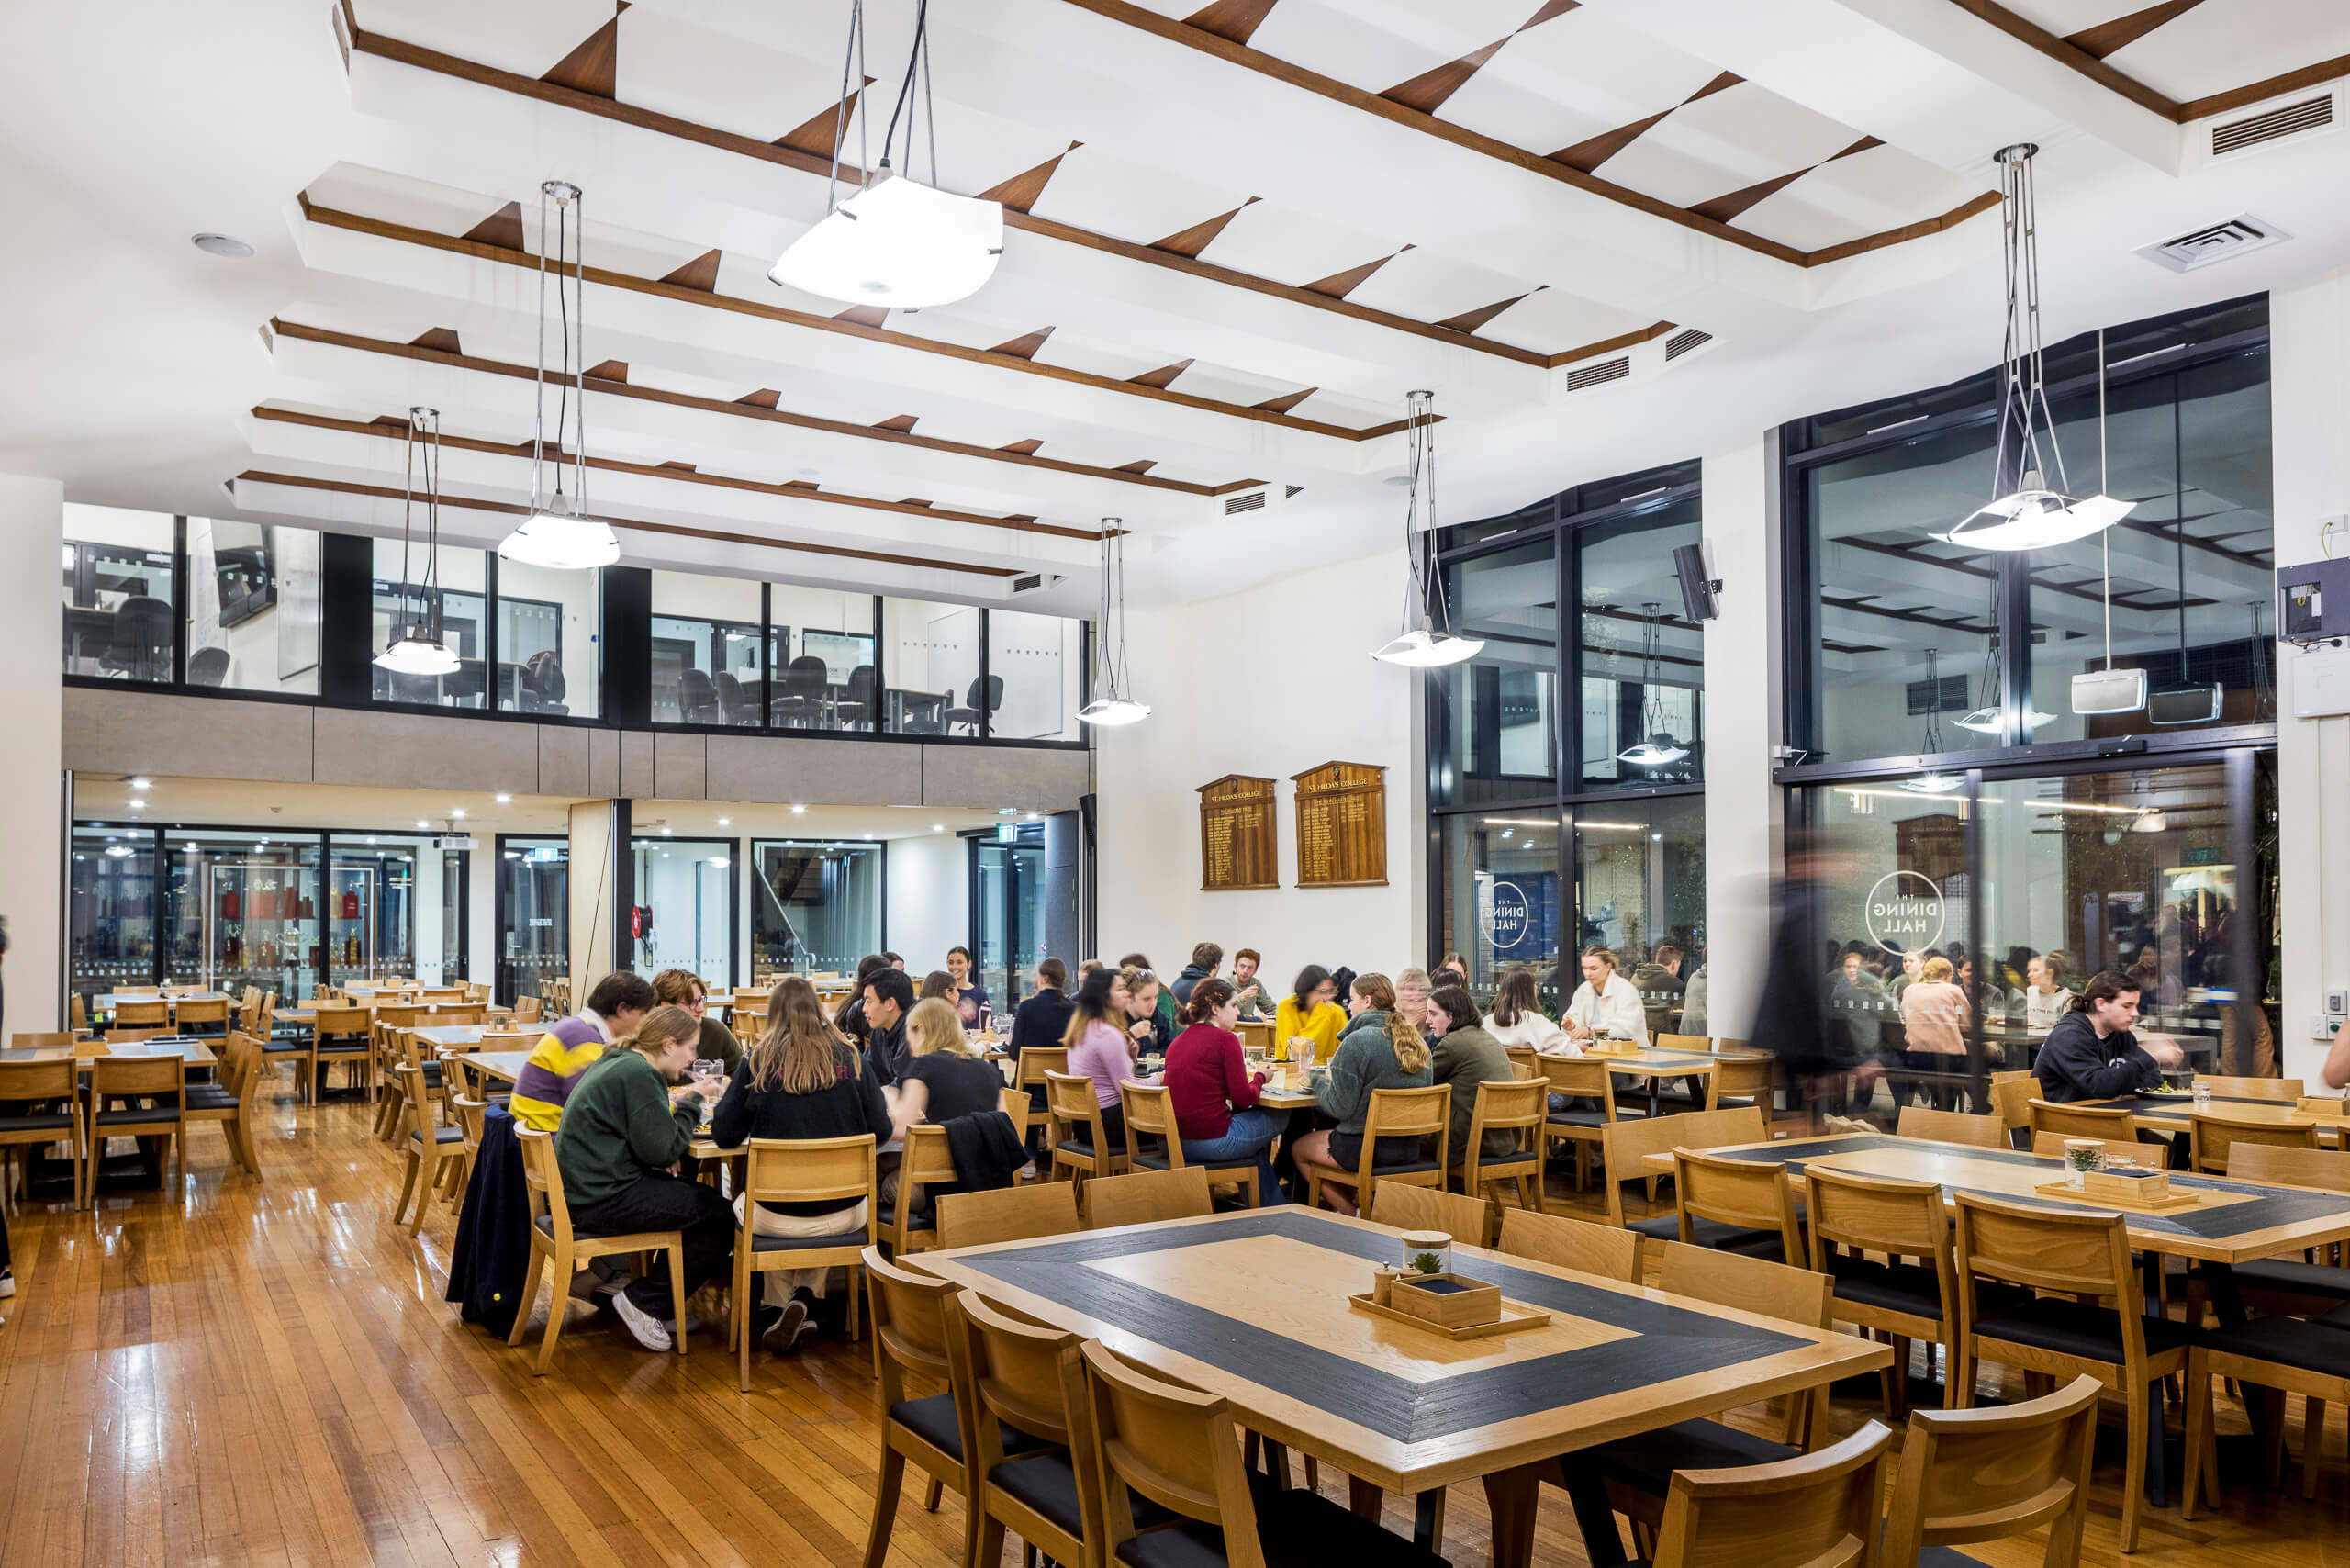 Large student dining hall with suspended pendants and inlay ceiling